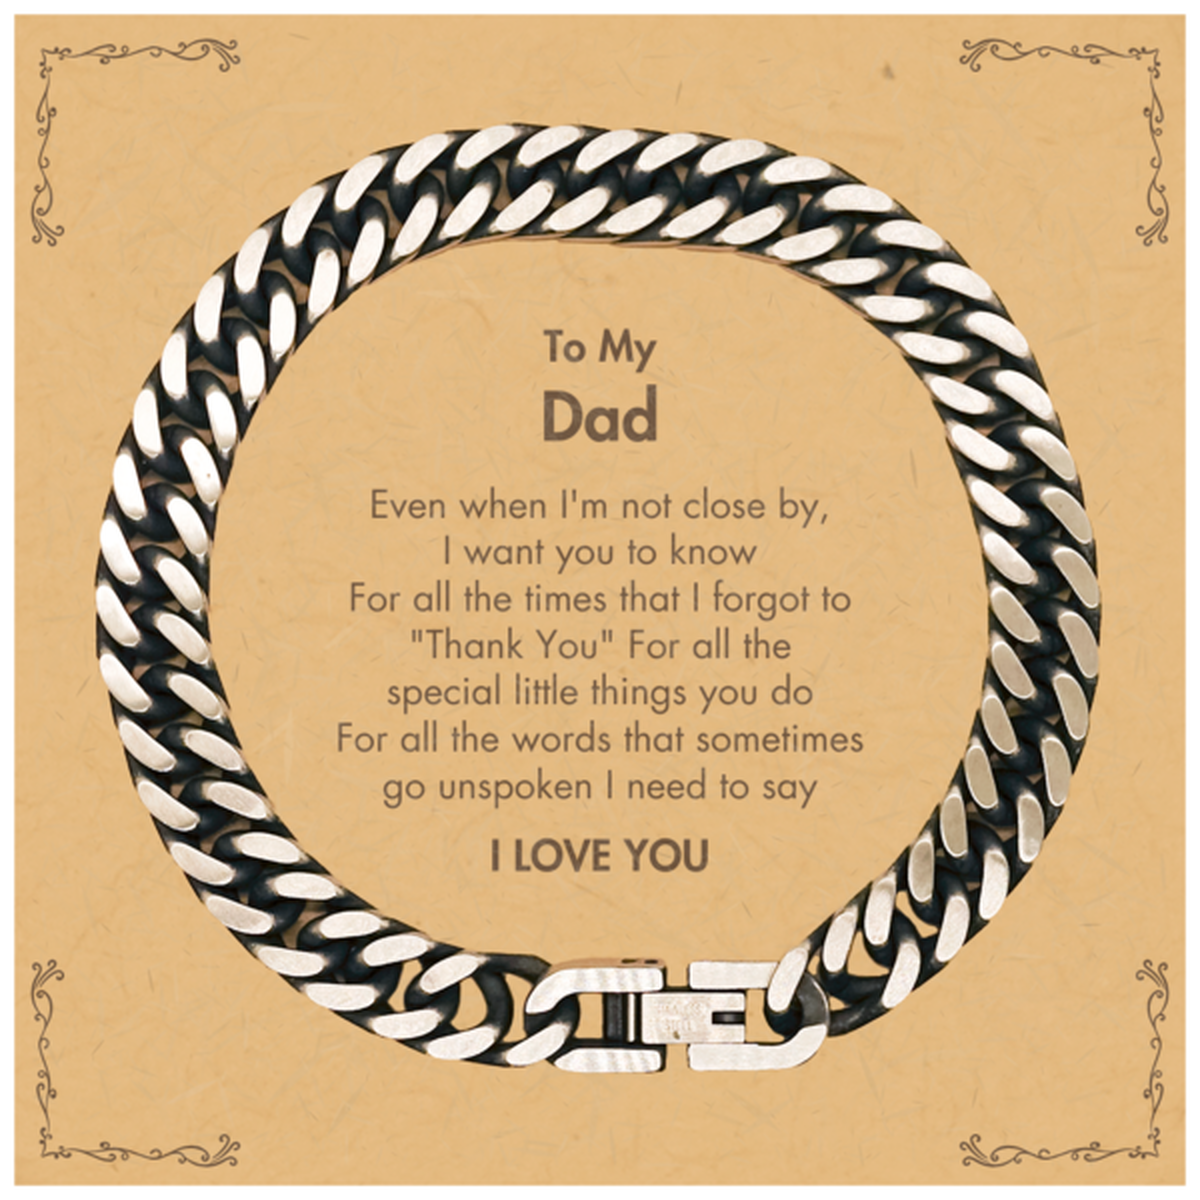 Thank You Gifts for Dad, Keepsake Cuban Link Chain Bracelet Gifts for Dad Birthday Mother's day Father's Day Dad For all the words That sometimes go unspoken I need to say I LOVE YOU